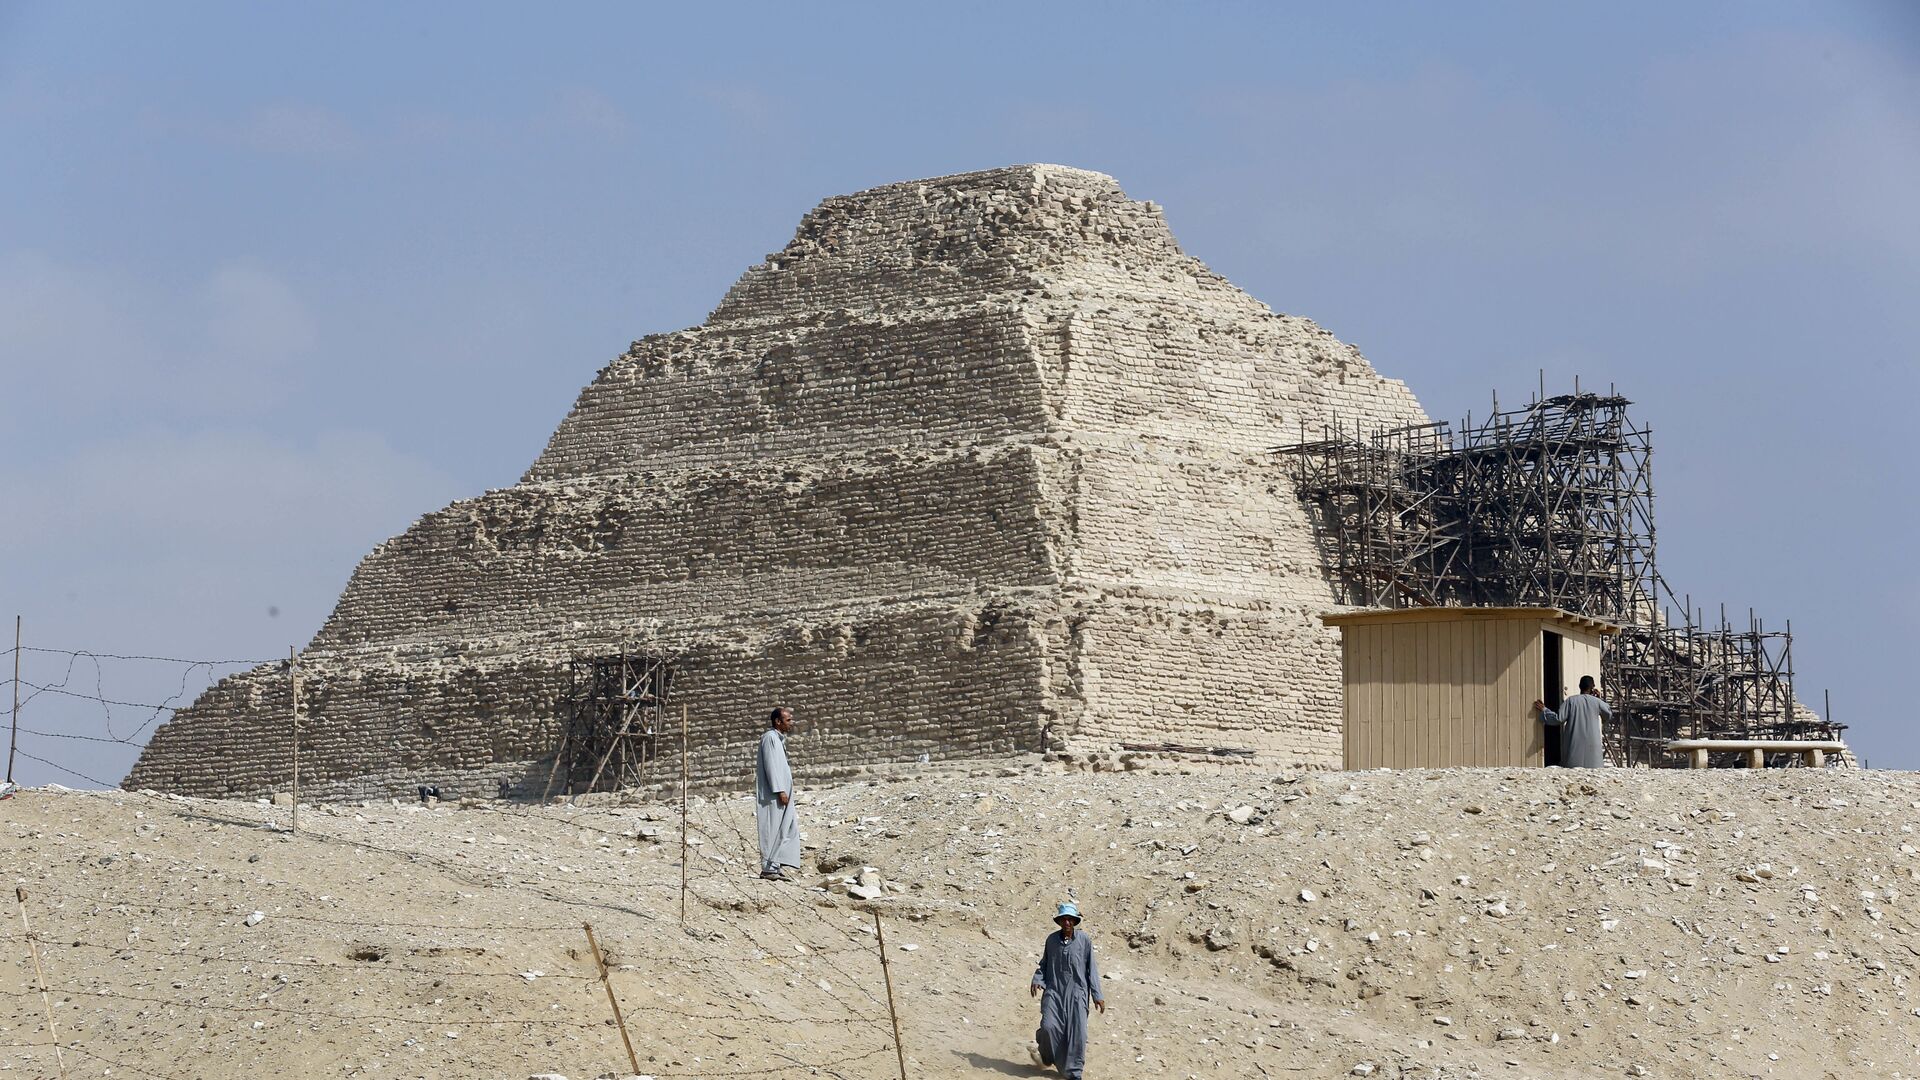 Excavation workers walk in front of the step pyramid of Saqqara, in Giza,14 July 2018.  (AP Photo/Amr Nabil) - Sputnik International, 1920, 30.05.2021